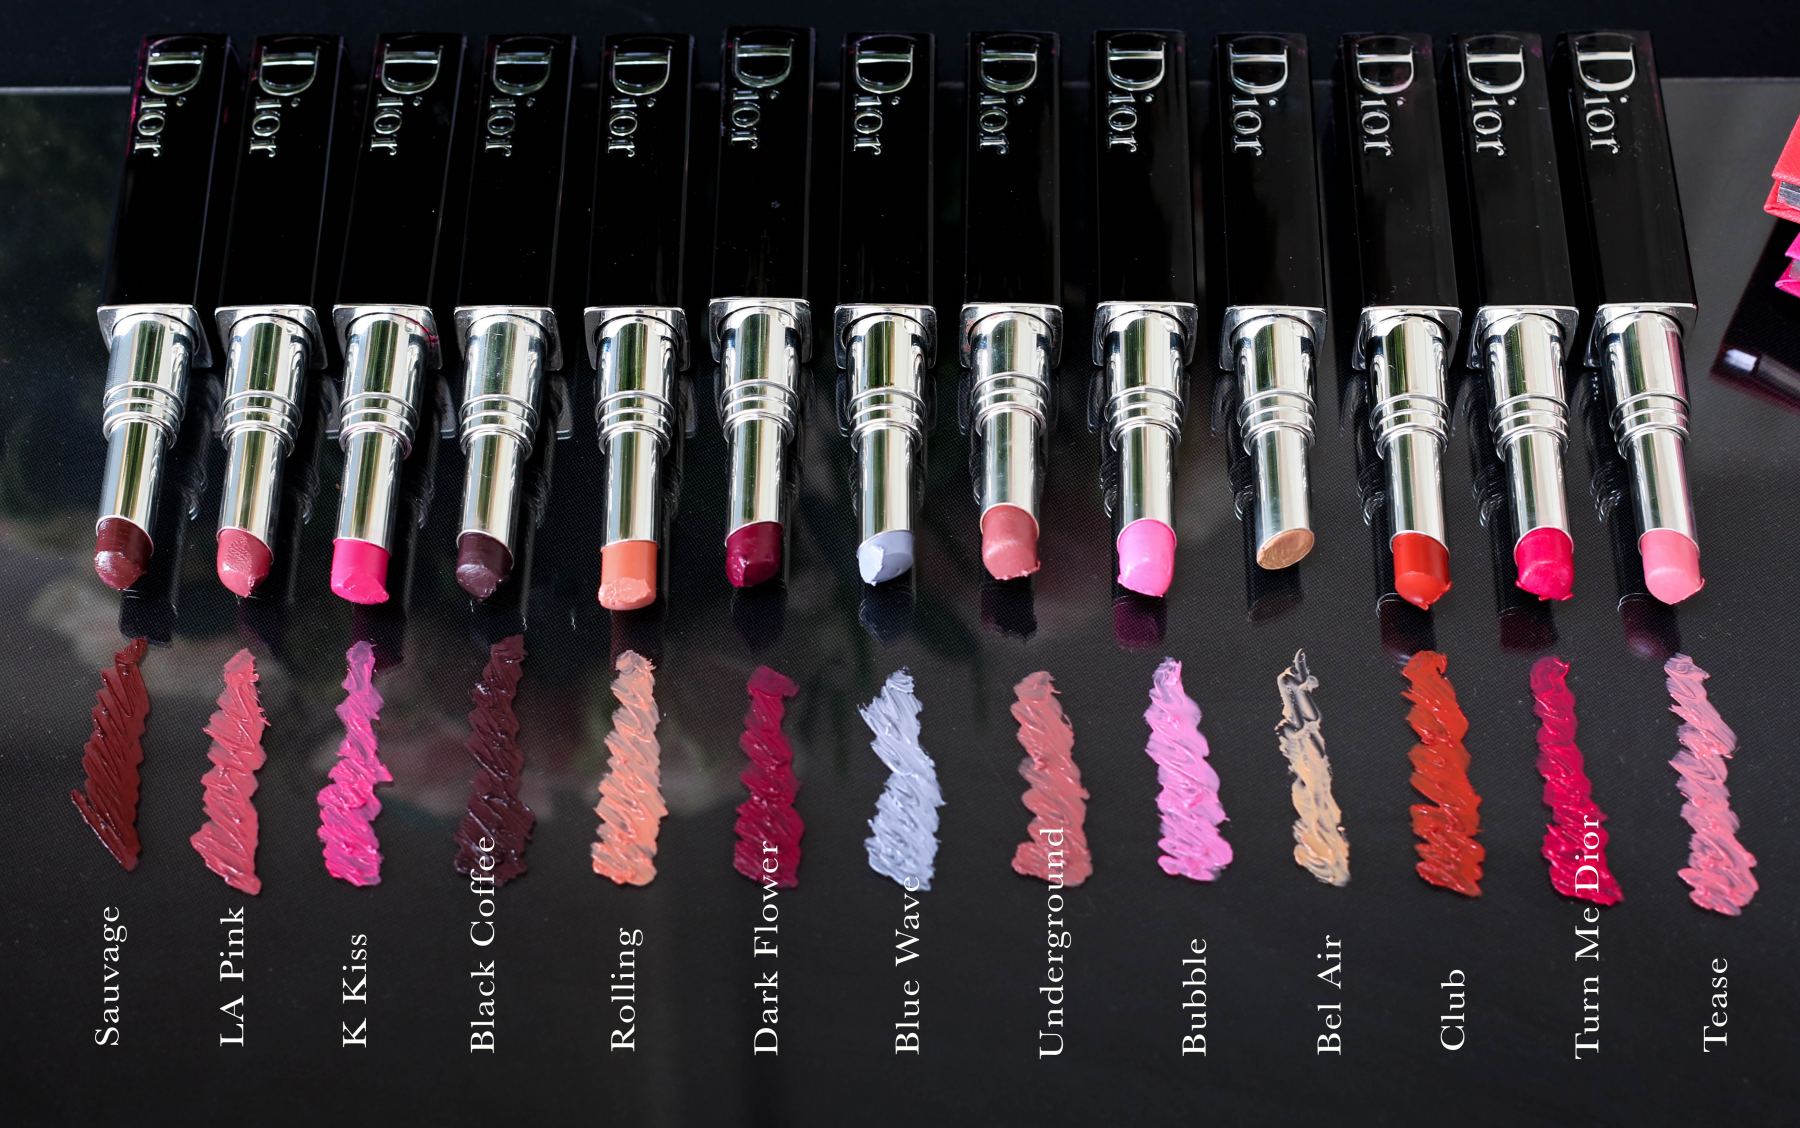 dior lacquer stick swatches